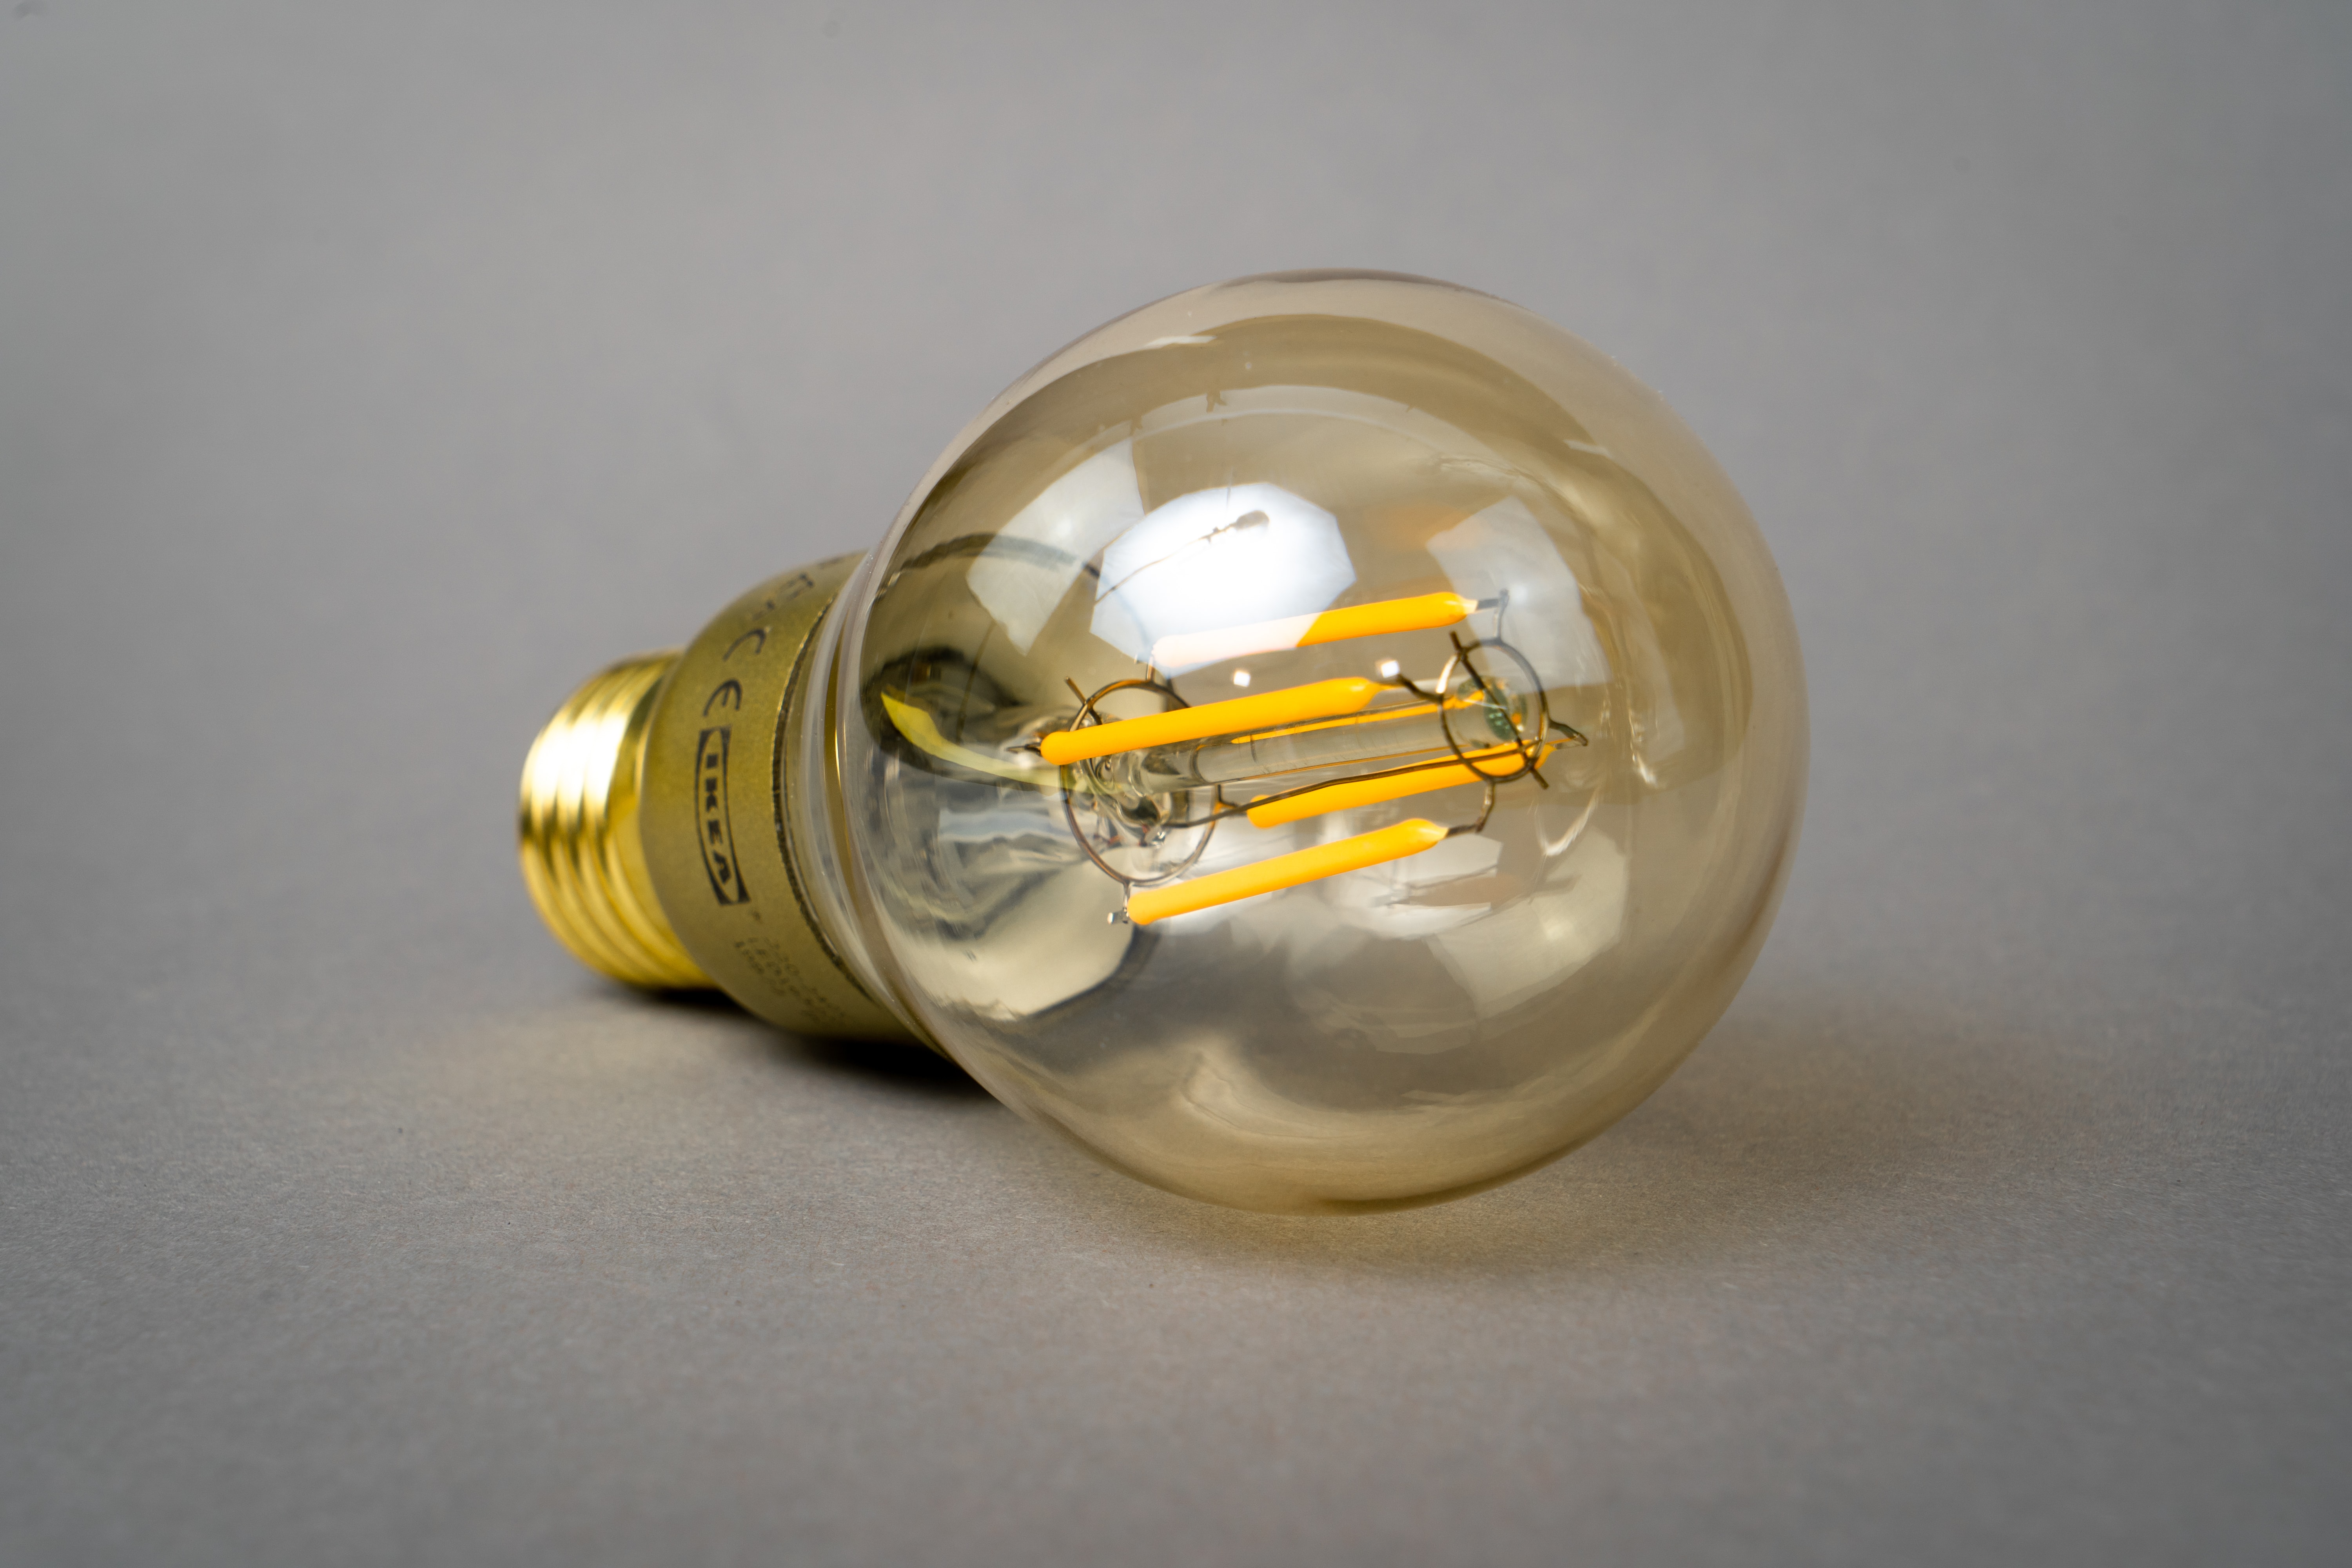 LED light bulb laying on a flat surface on its side